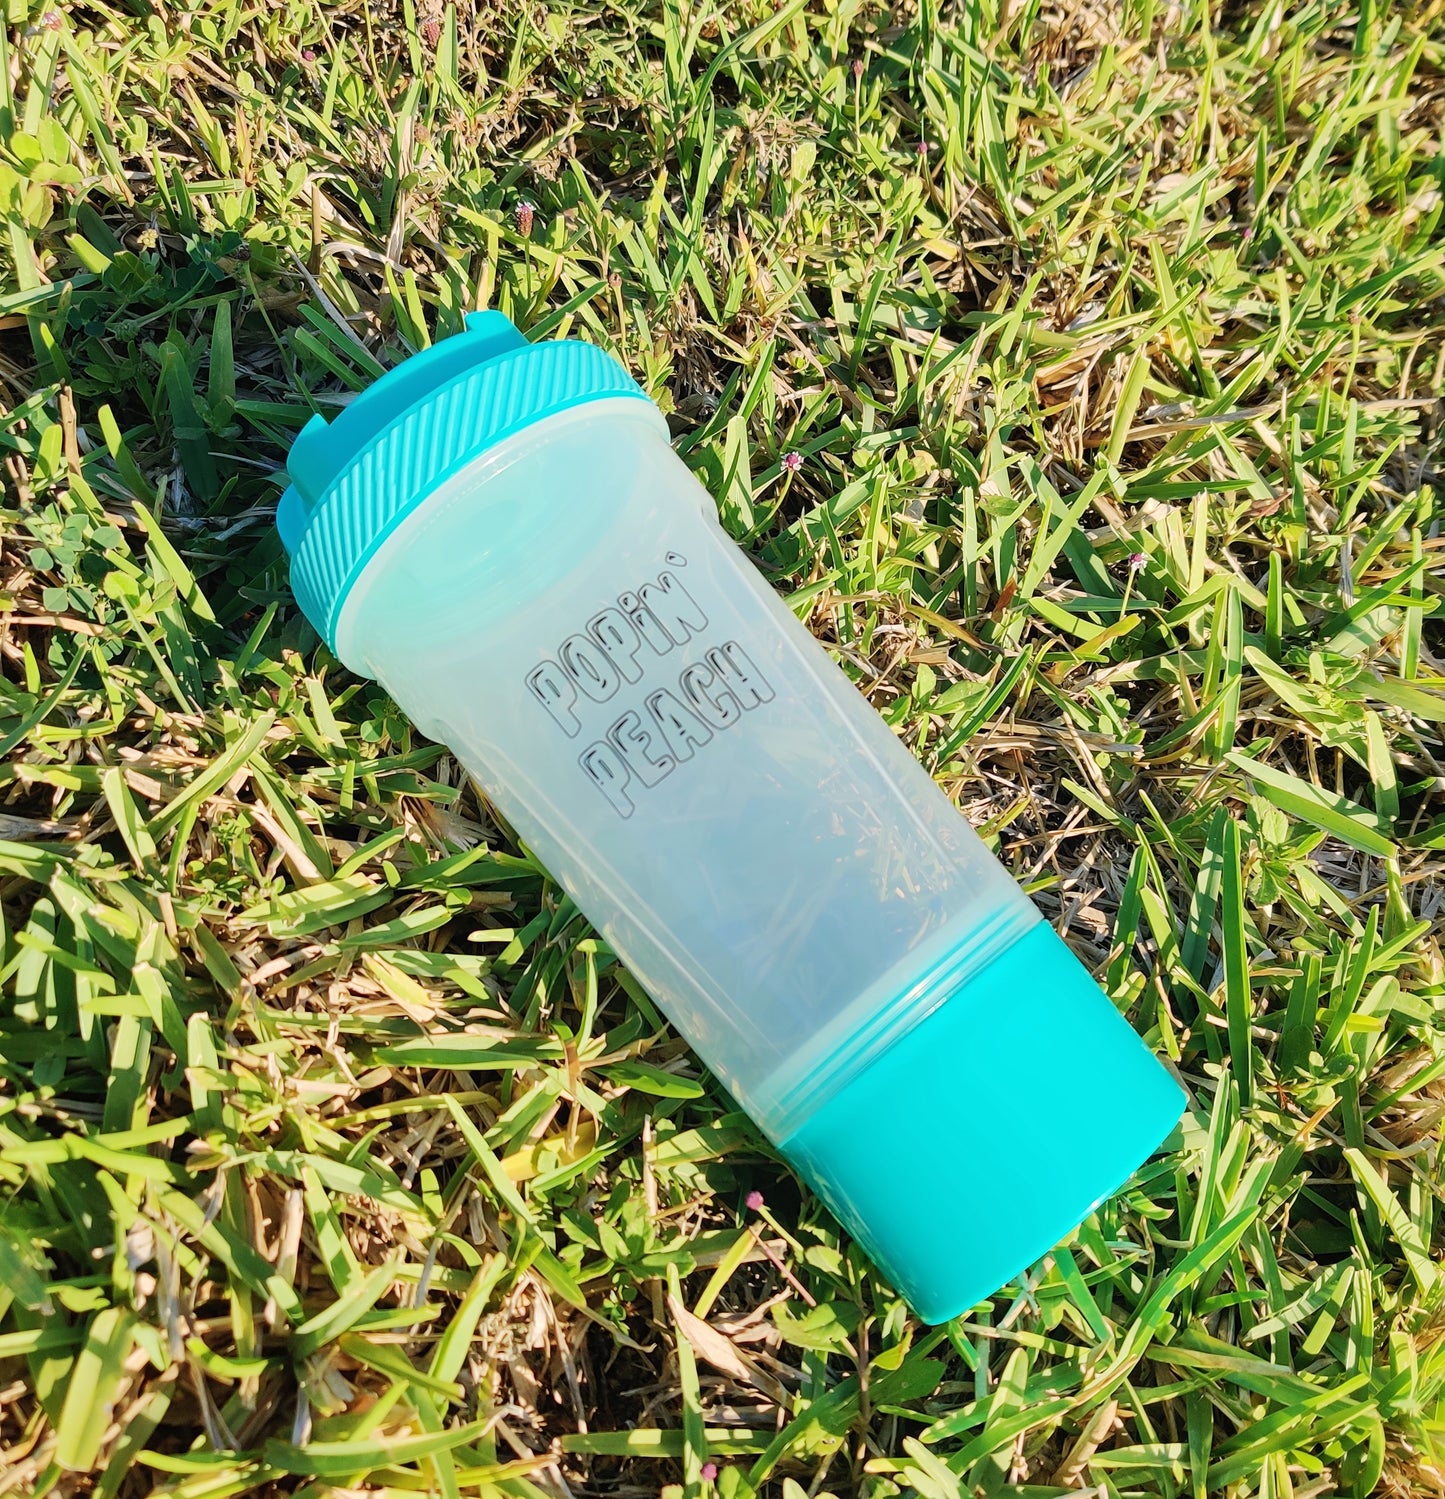 On the go Protein Shaker!